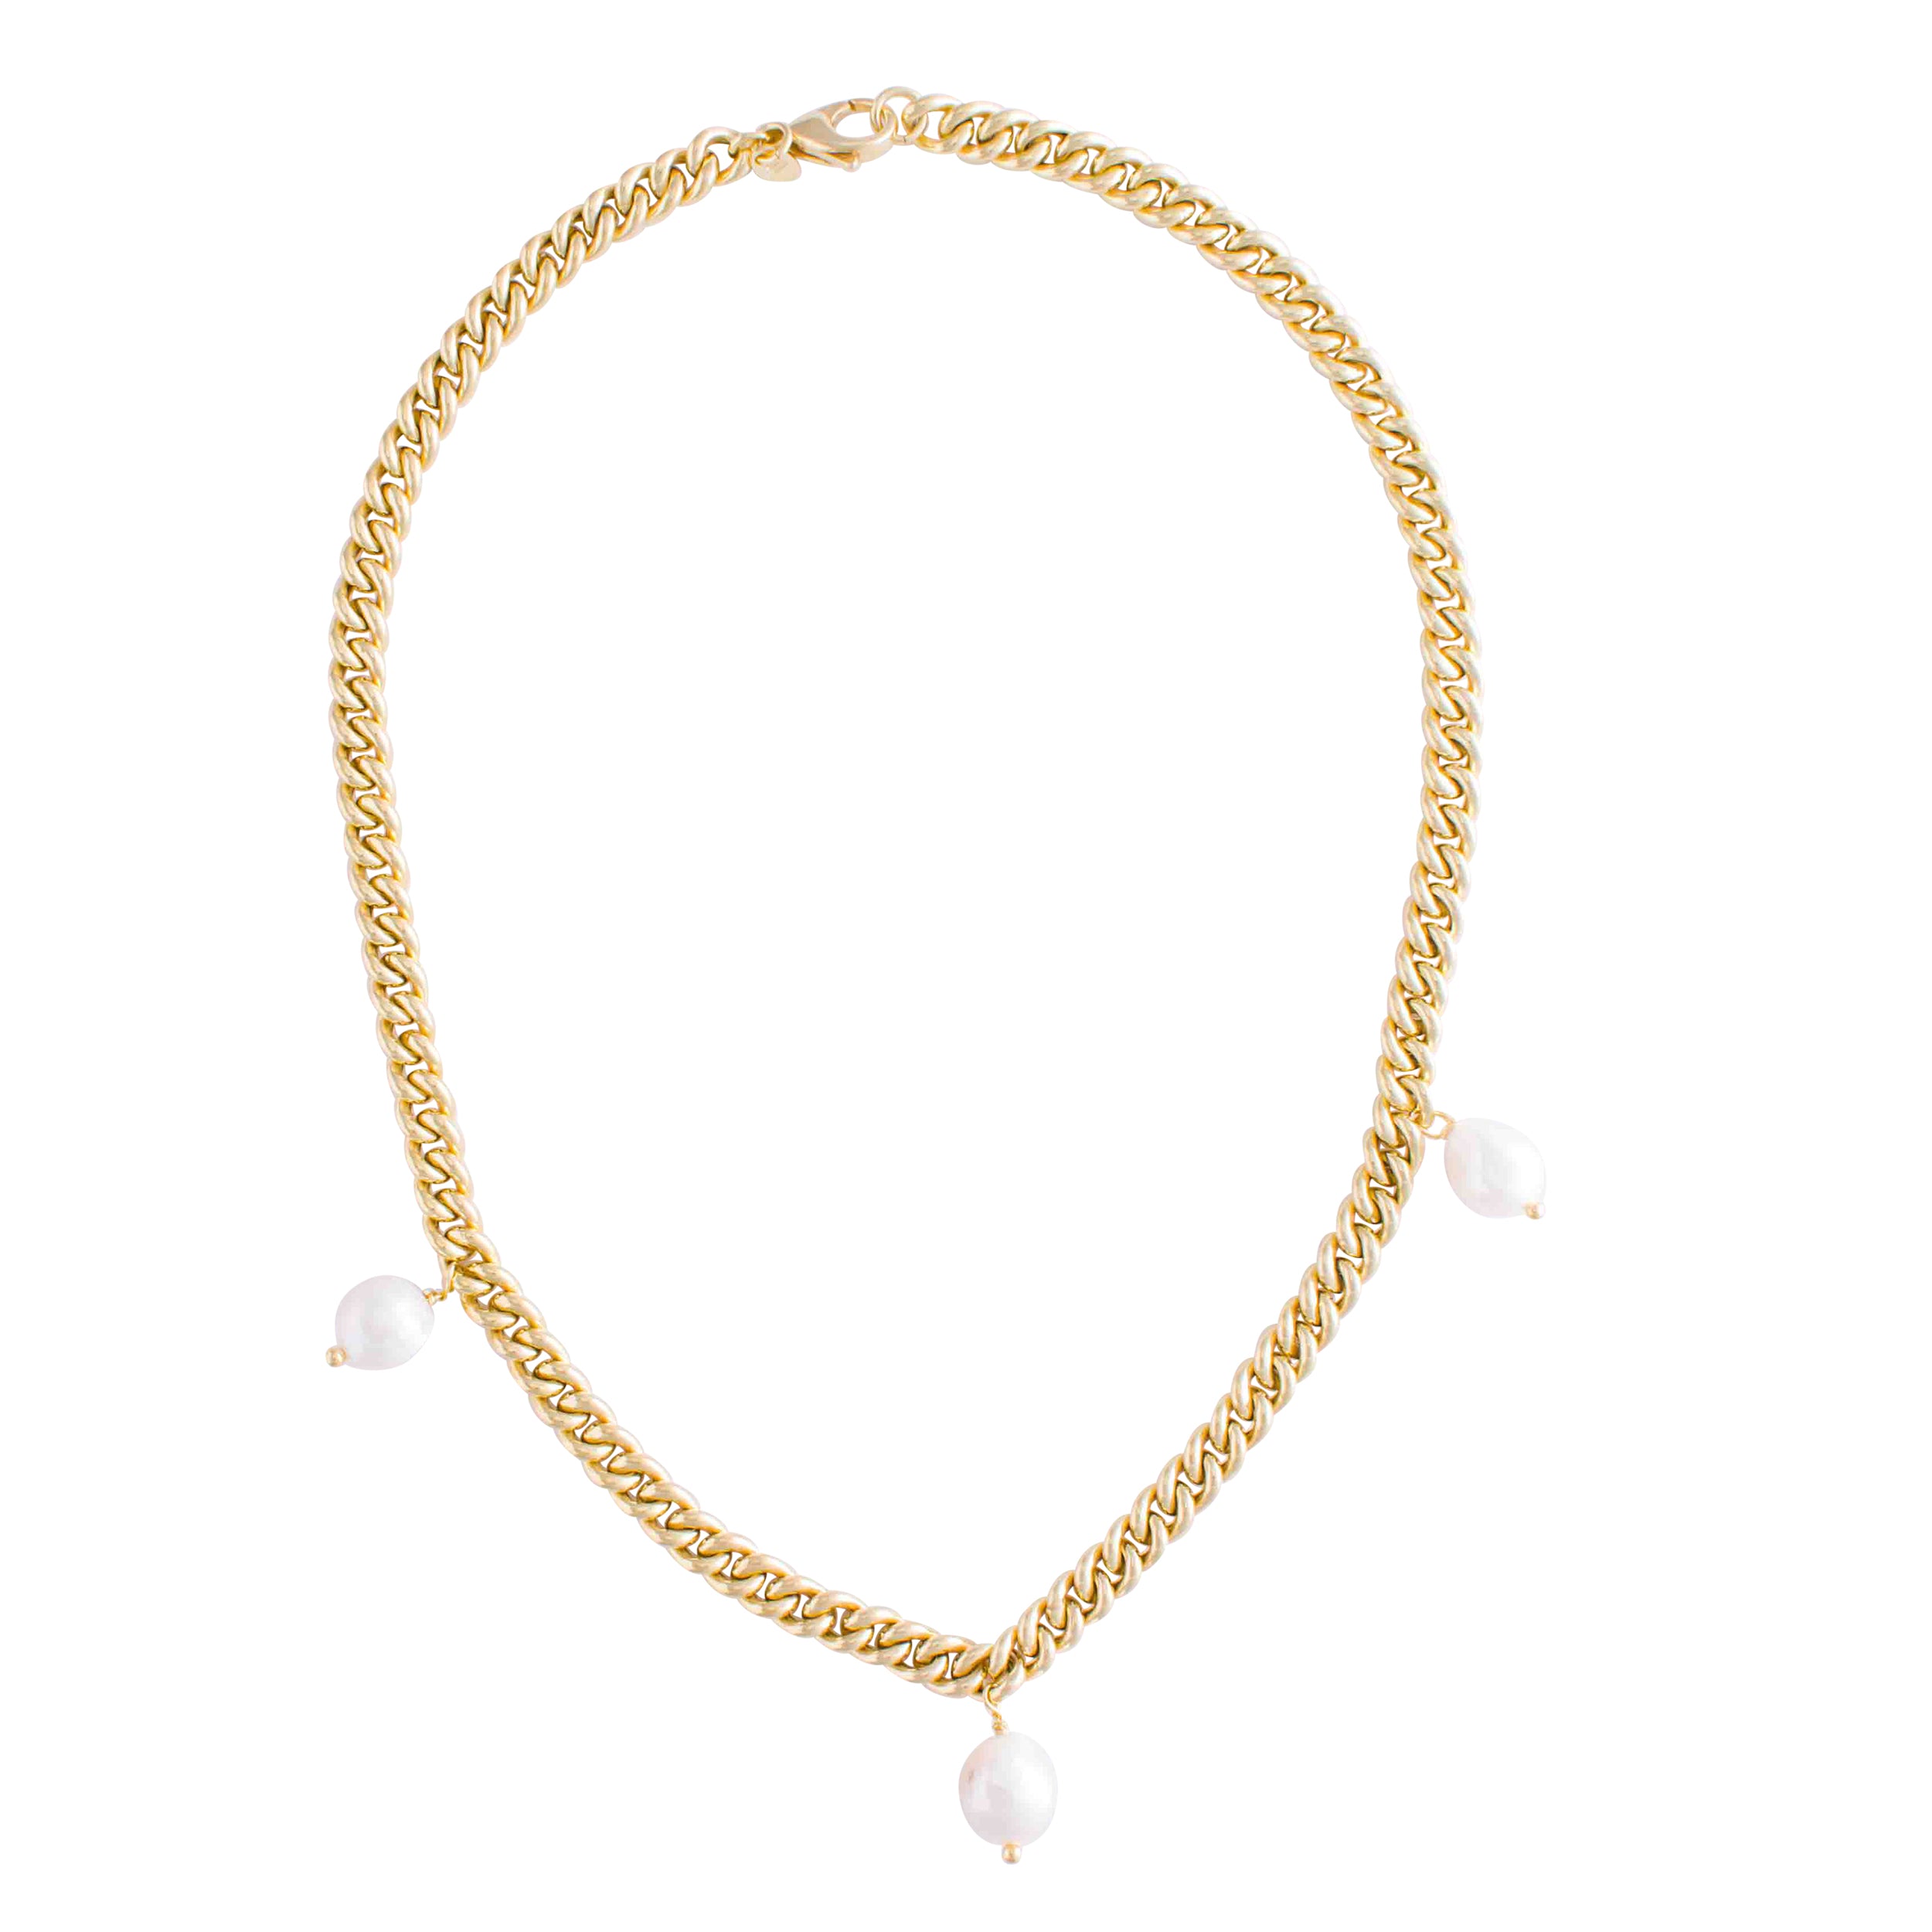 CHUNKY GOLD CURB CHAIN NECKLACE WITH PEARL CHARMS